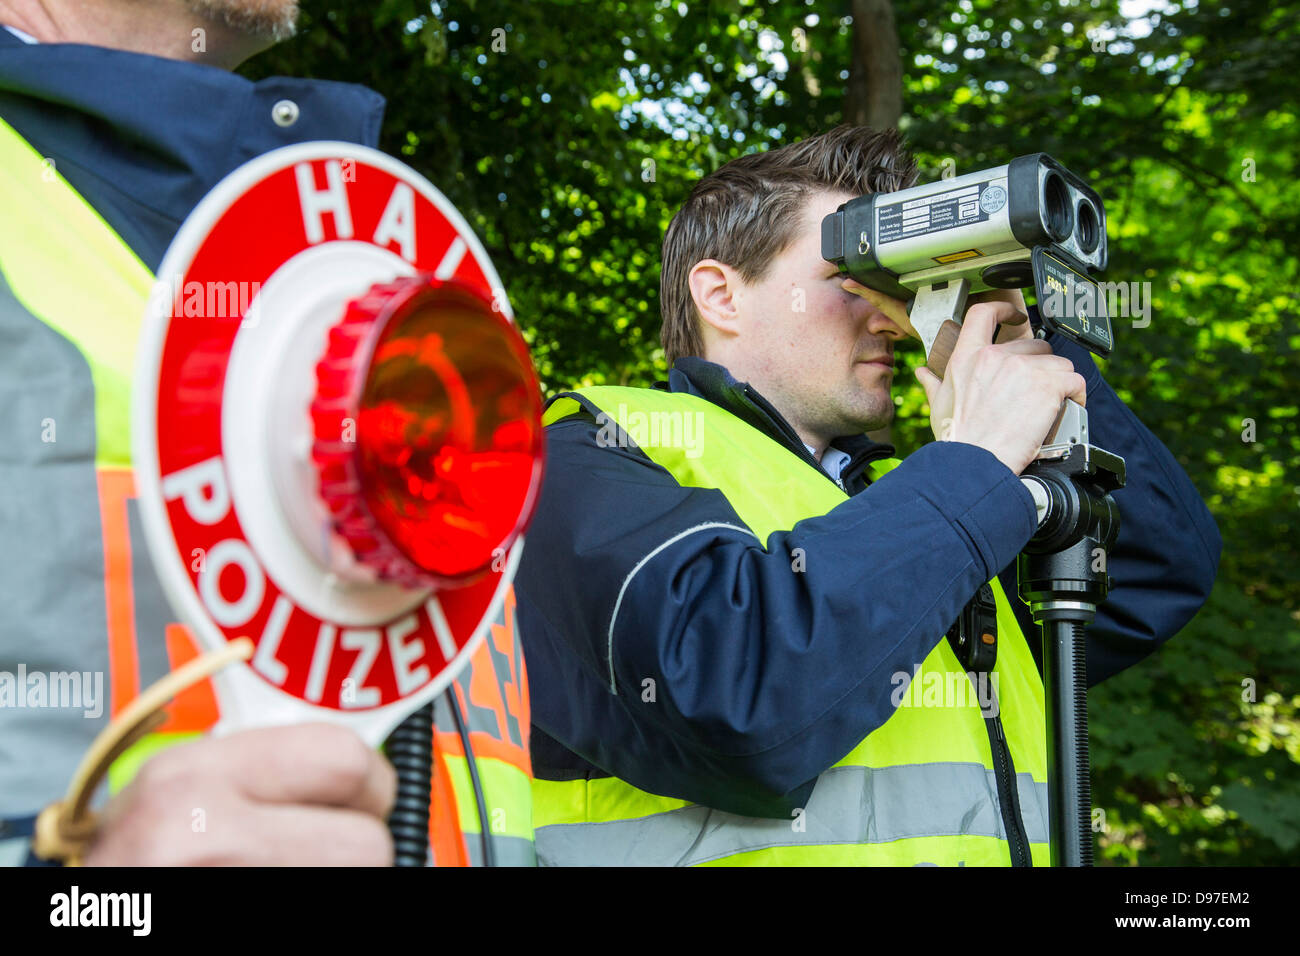 Police speed control, speed measuring with a laser speed gun. Stock Photo